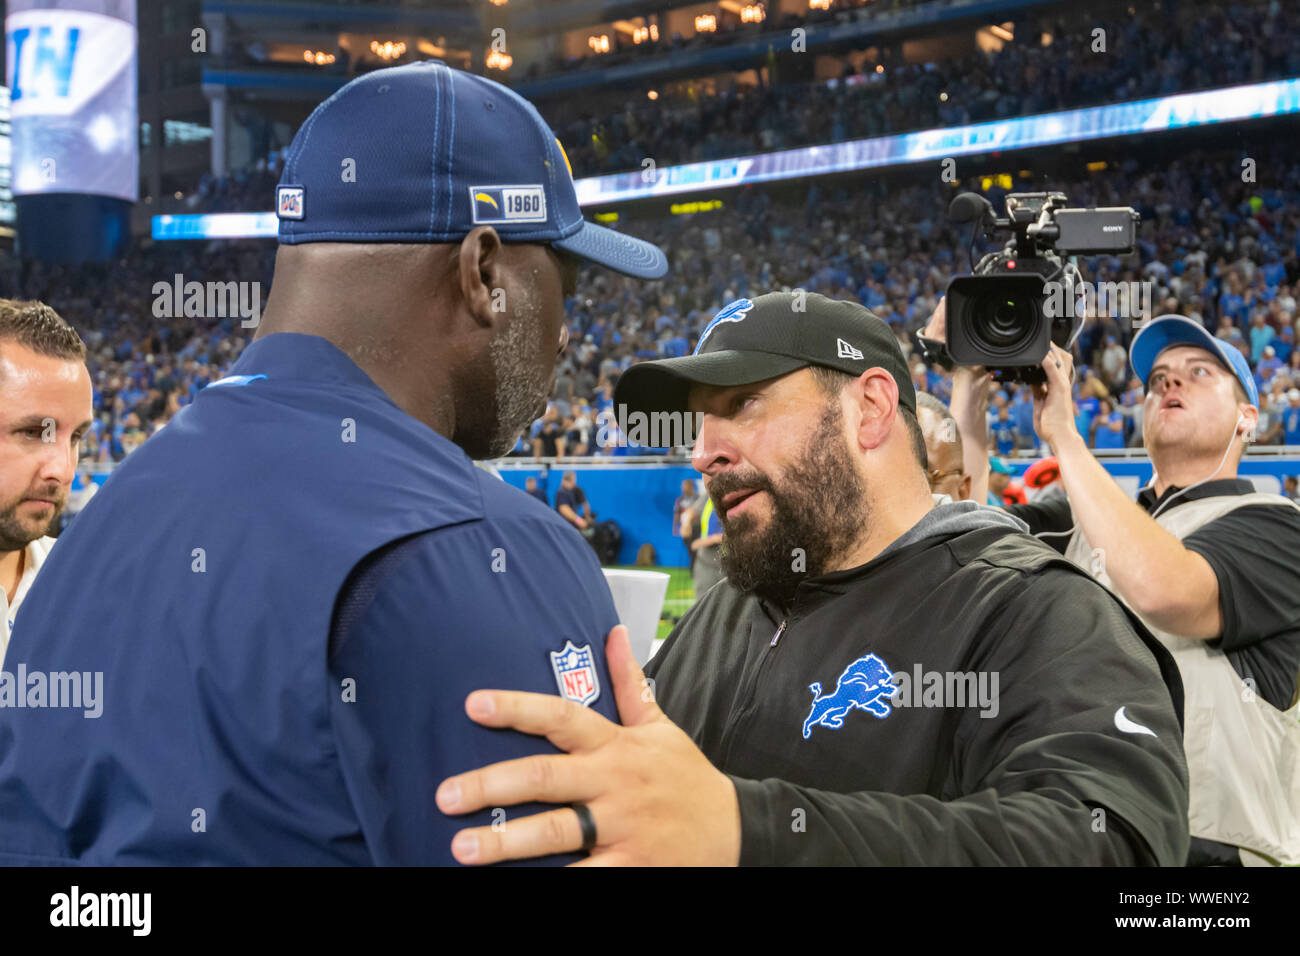 DETROIT, MI - SEPTEMBER 15: Detroit Lions head coach Matt Patricia and Los Angeles Chargers head coach Anthony Lynn shake hands following the NFL game between Los Angeles Chargers and Detroit Lions on September 15, 2019 at Ford Field in Detroit, MI (Photo by Allan Dranberg/CSM) Stock Photo